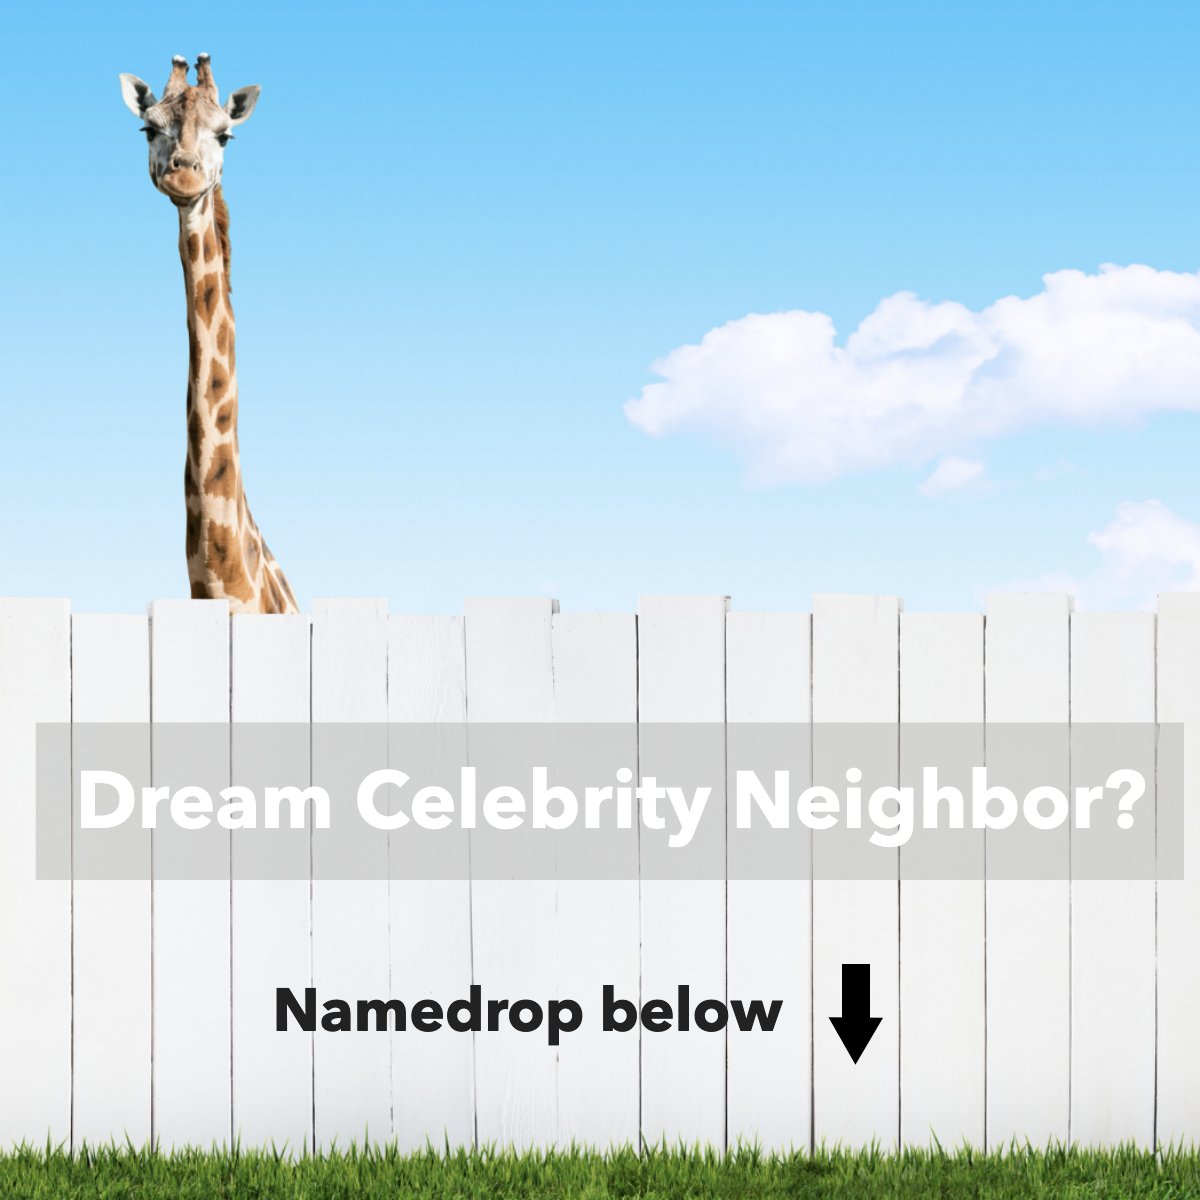 Imagine having a huge celebrity as a neighbor! ⭐️

Who would you like it to be? 😯

#question     #neighbor     #dreamhouse     #celebrity
#barbarabarker #barrettrealestate #barbarabarkerteam #realestate #scottsdale #chandler #queencreek #gilbert #homes #azhomes